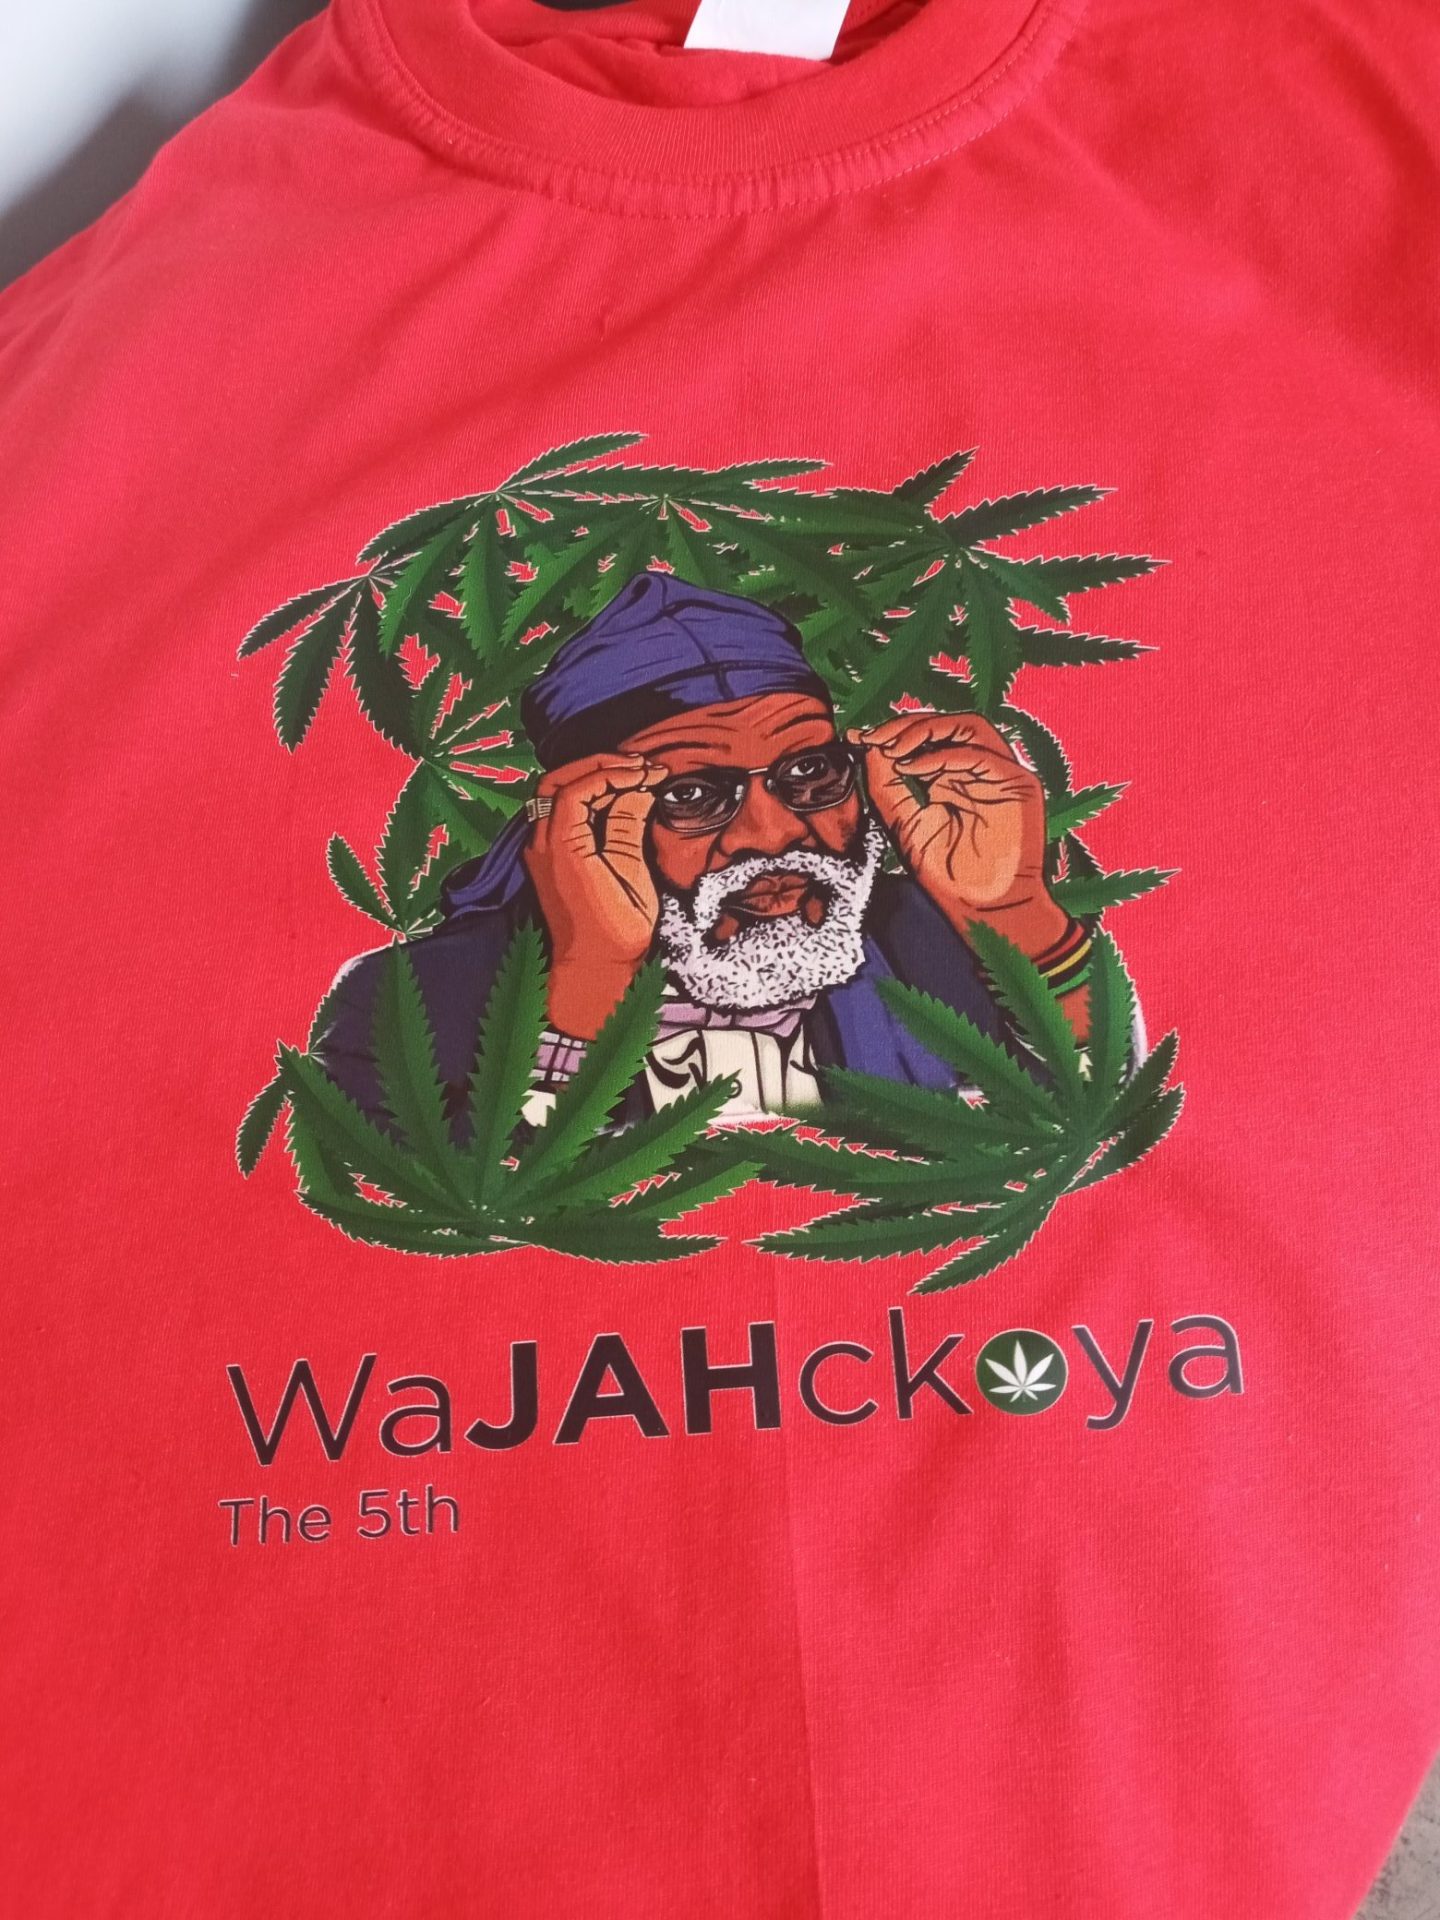 Drae Frank: Kenyan Youth Minting a Fortune From Selling Wajackoya T-Shirts